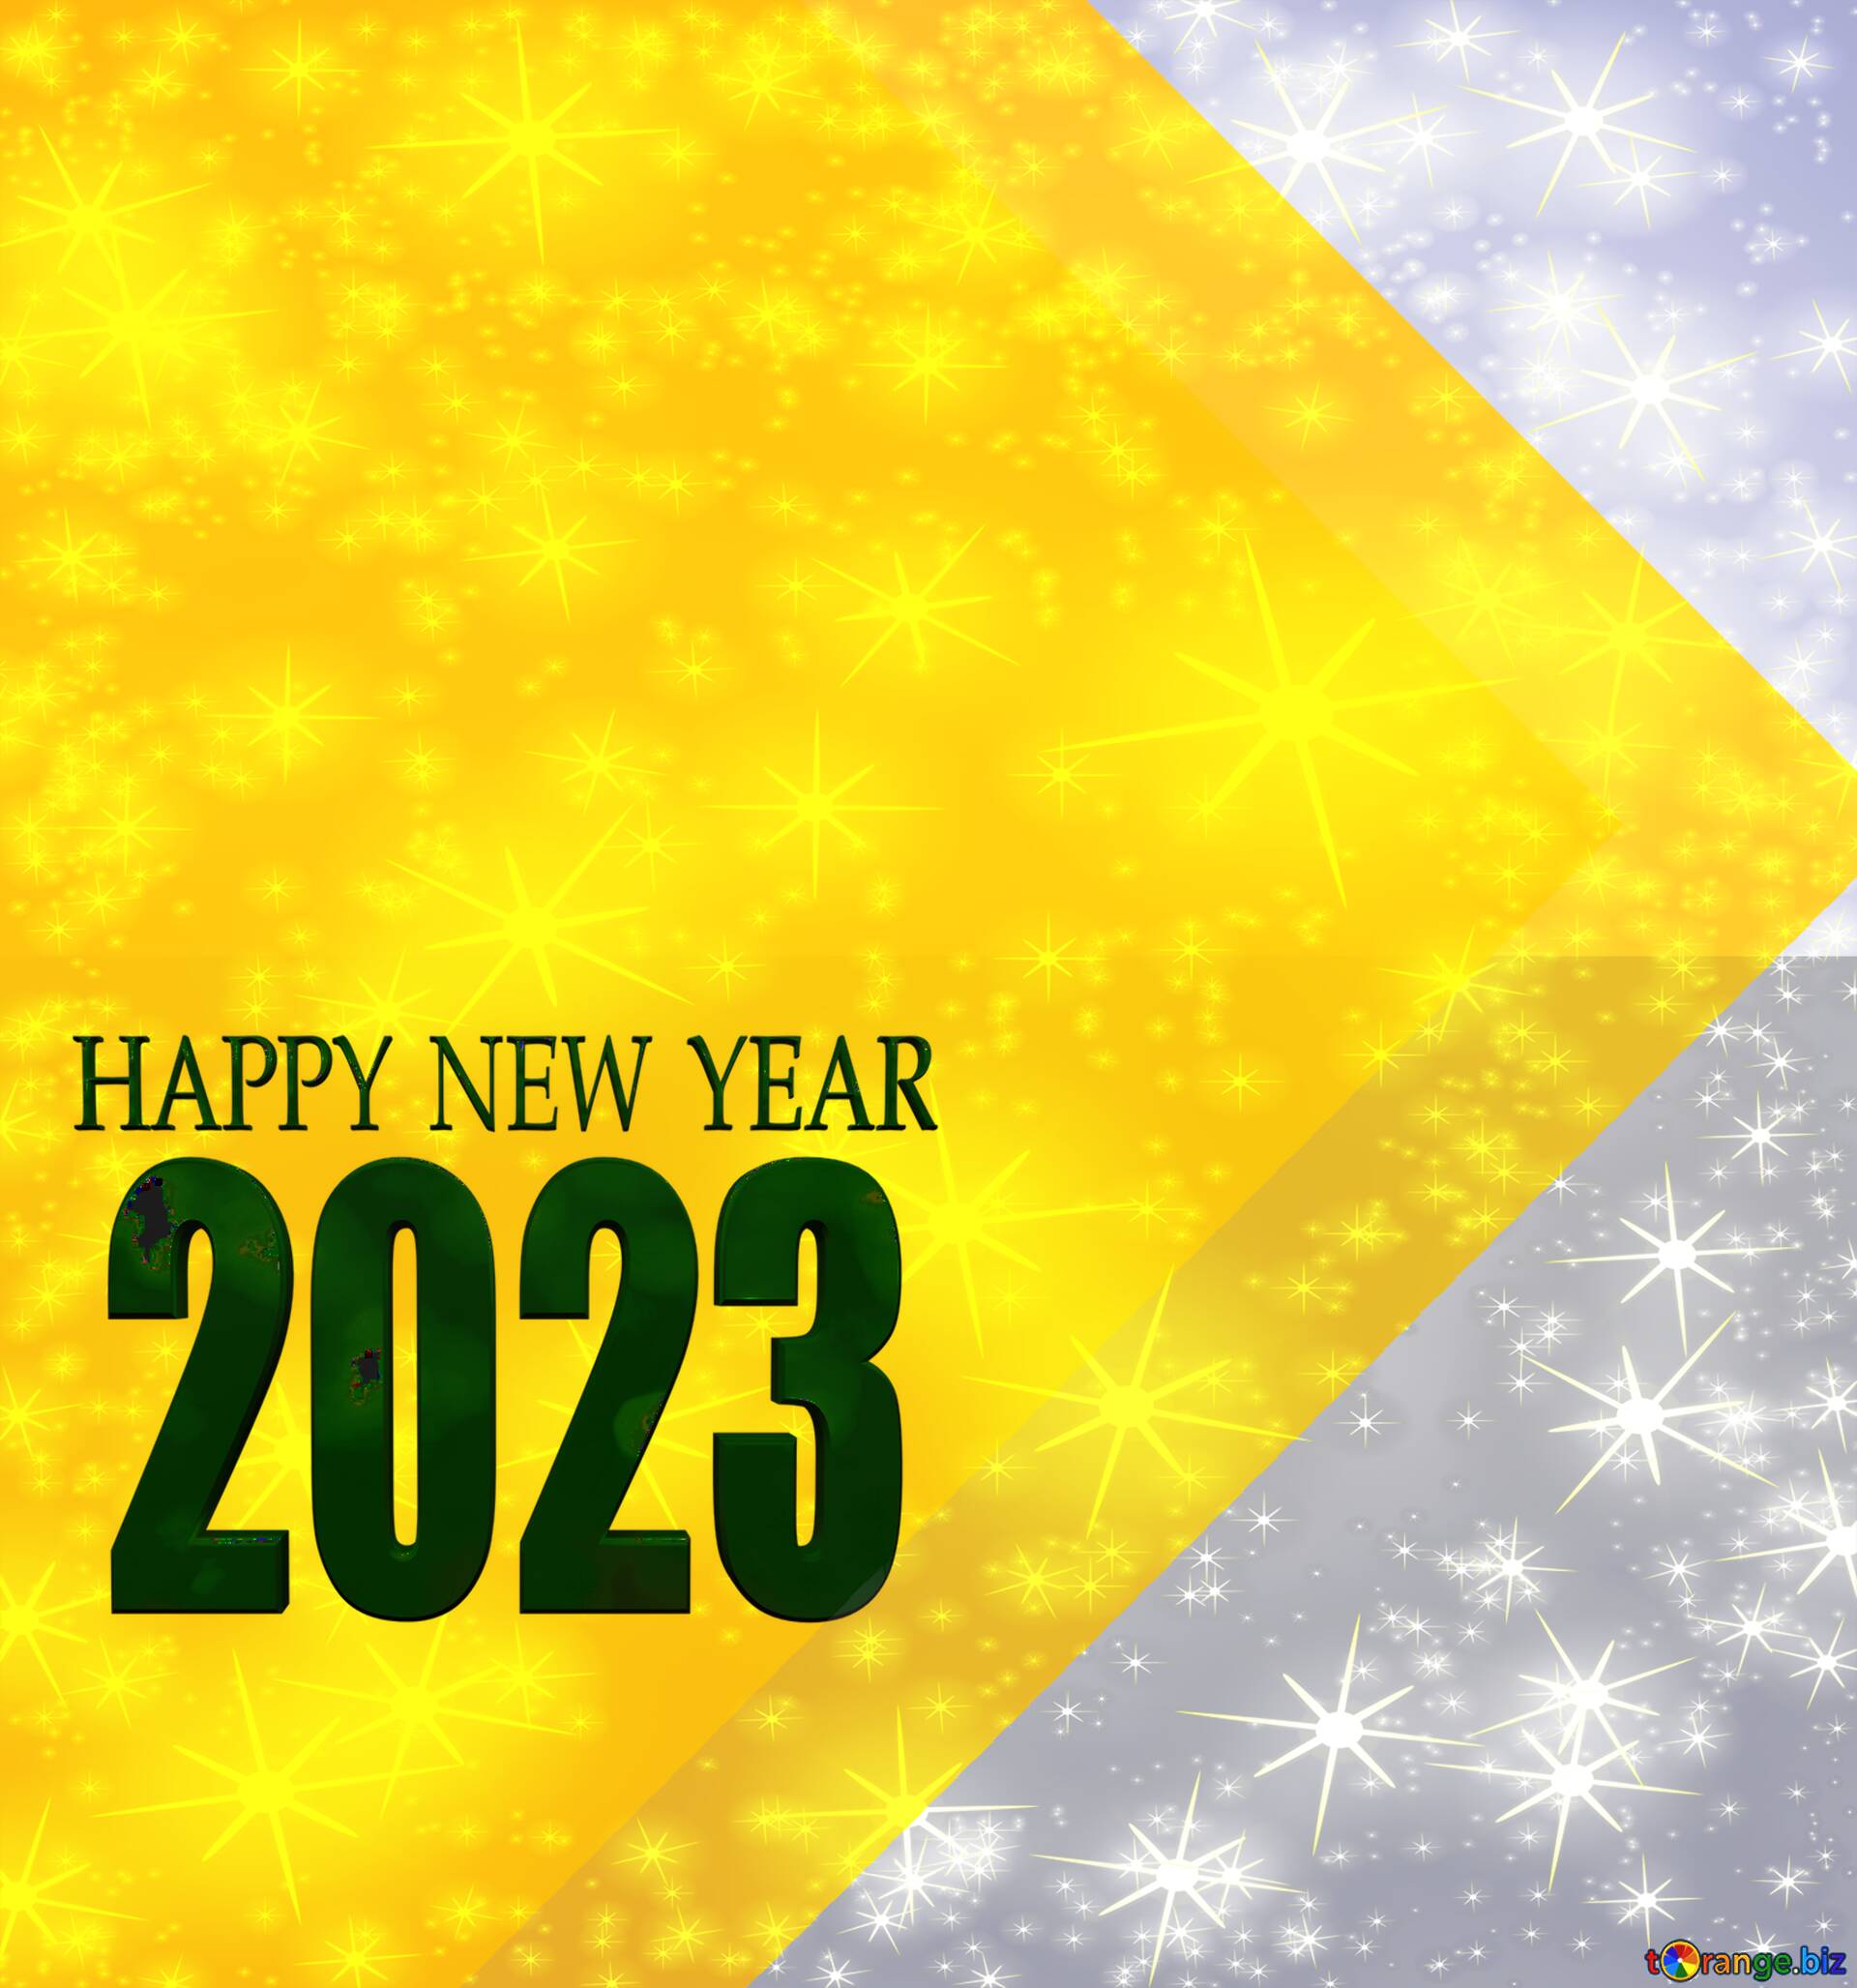 2023 Happy New Year Wallpapers - Wallpaper Cave